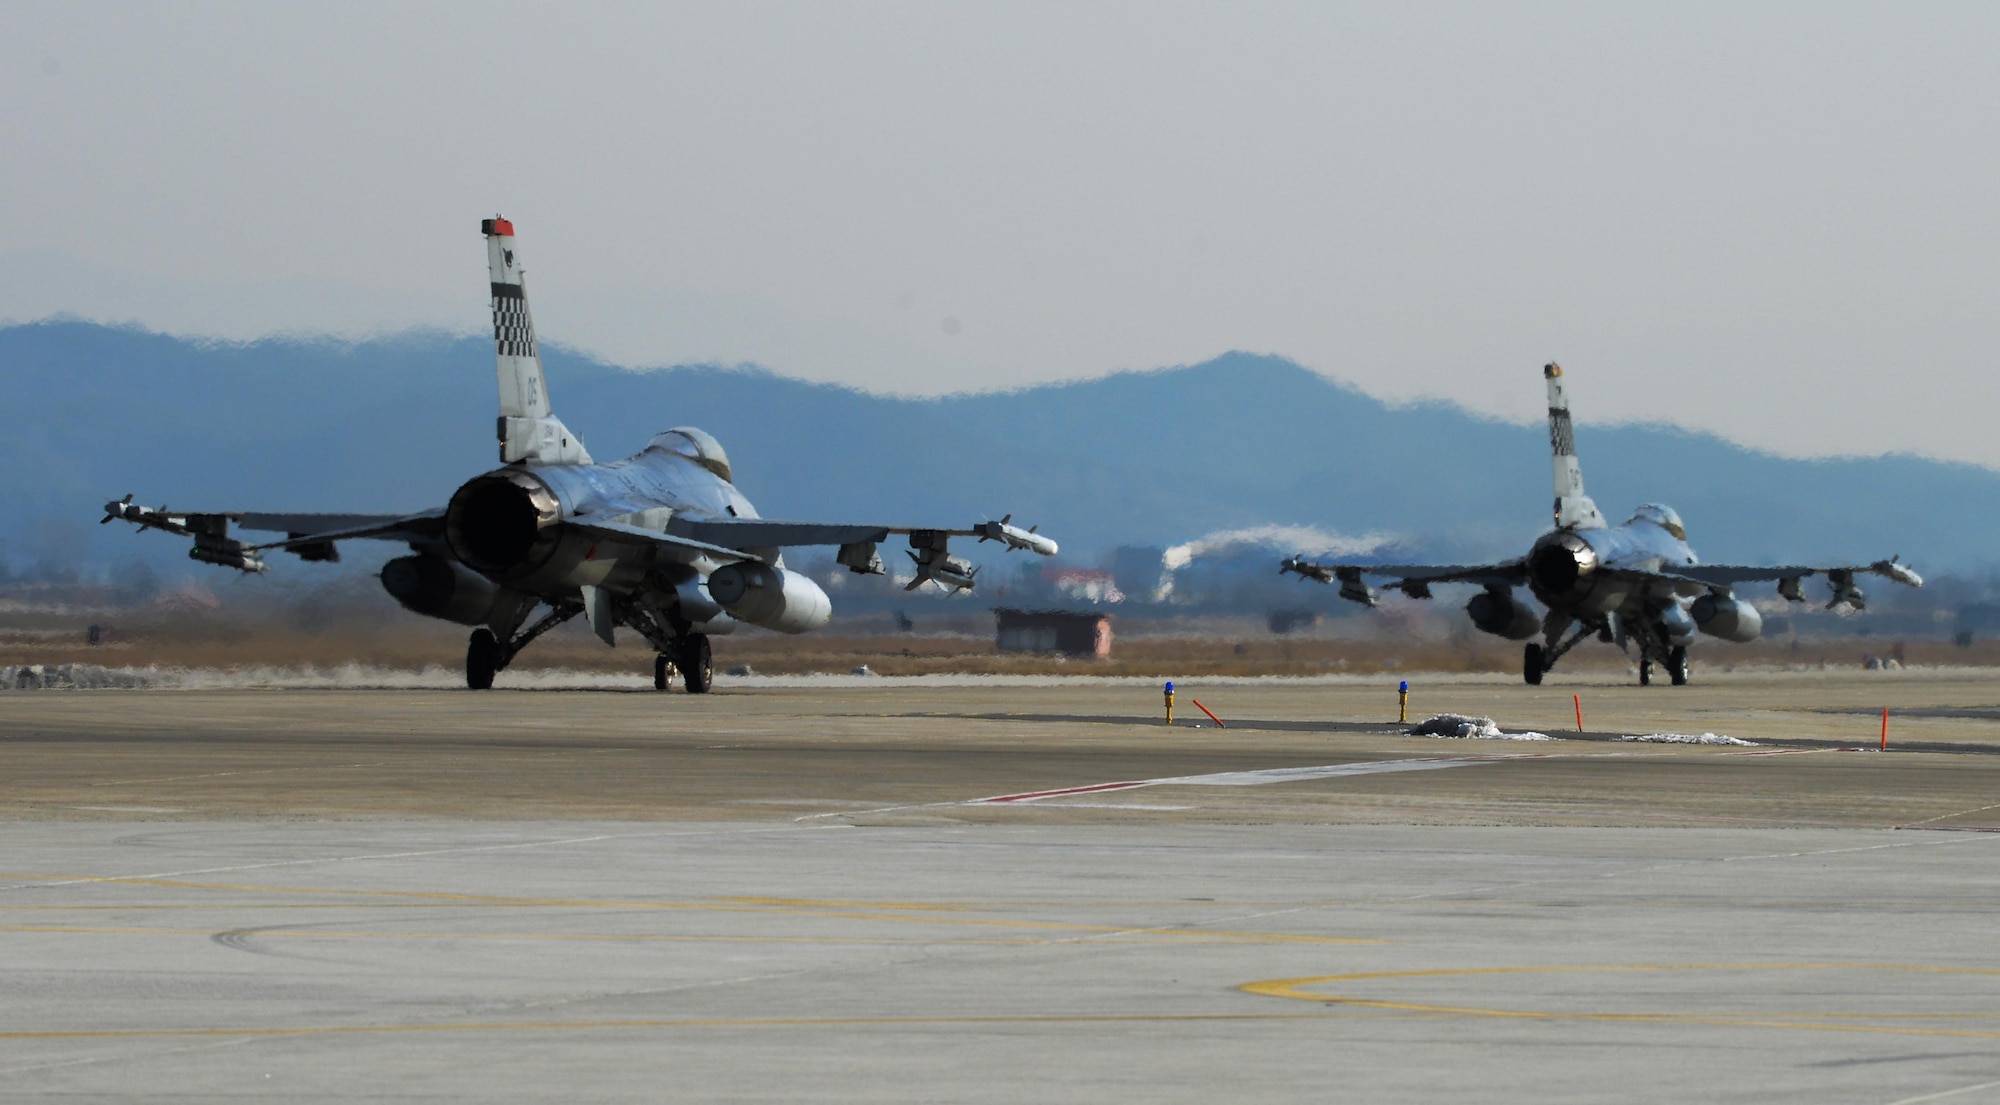 F-16 Fighting Falcons taxi before takeoff on the new runway at Osan Air Base, Republic of Korea, Jan. 22, 2016. The 51st Operations Support Squadron and 36th Fighter Squadron use the new runway to execute training and combat missions for the Republic of Korea. (U.S. Air Force photo by Airman 1st Class Dillian Bamman/Released)